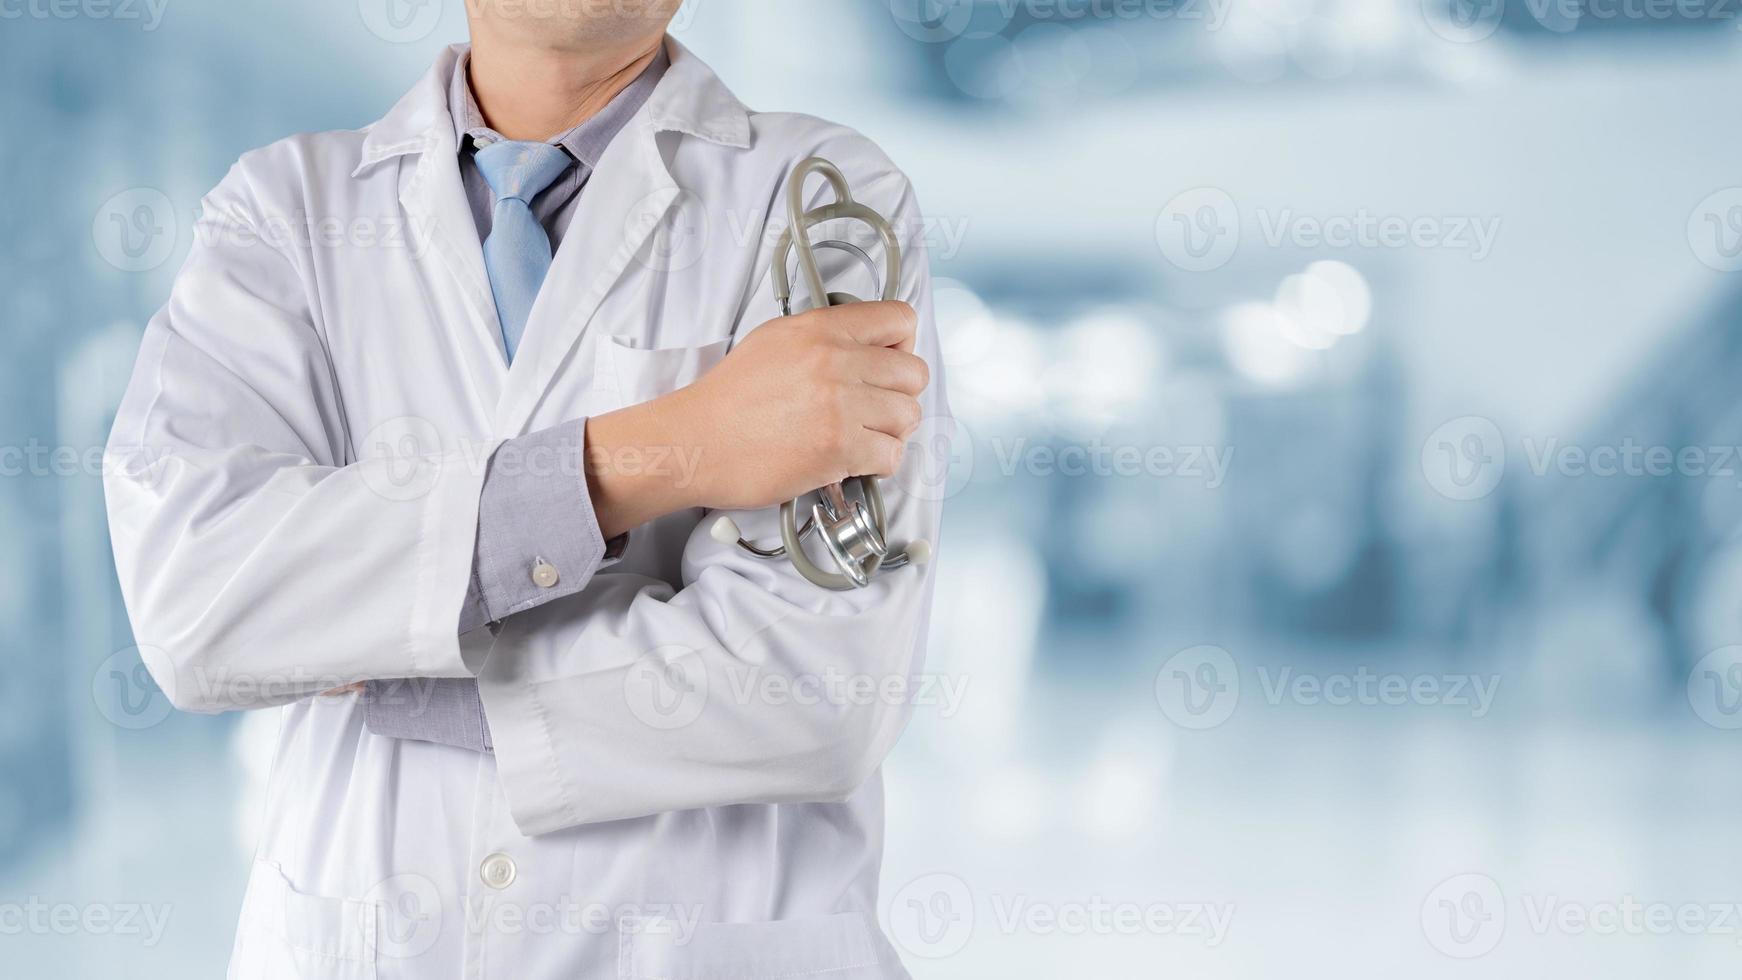 Doctor with stethoscope in the hospital background photo